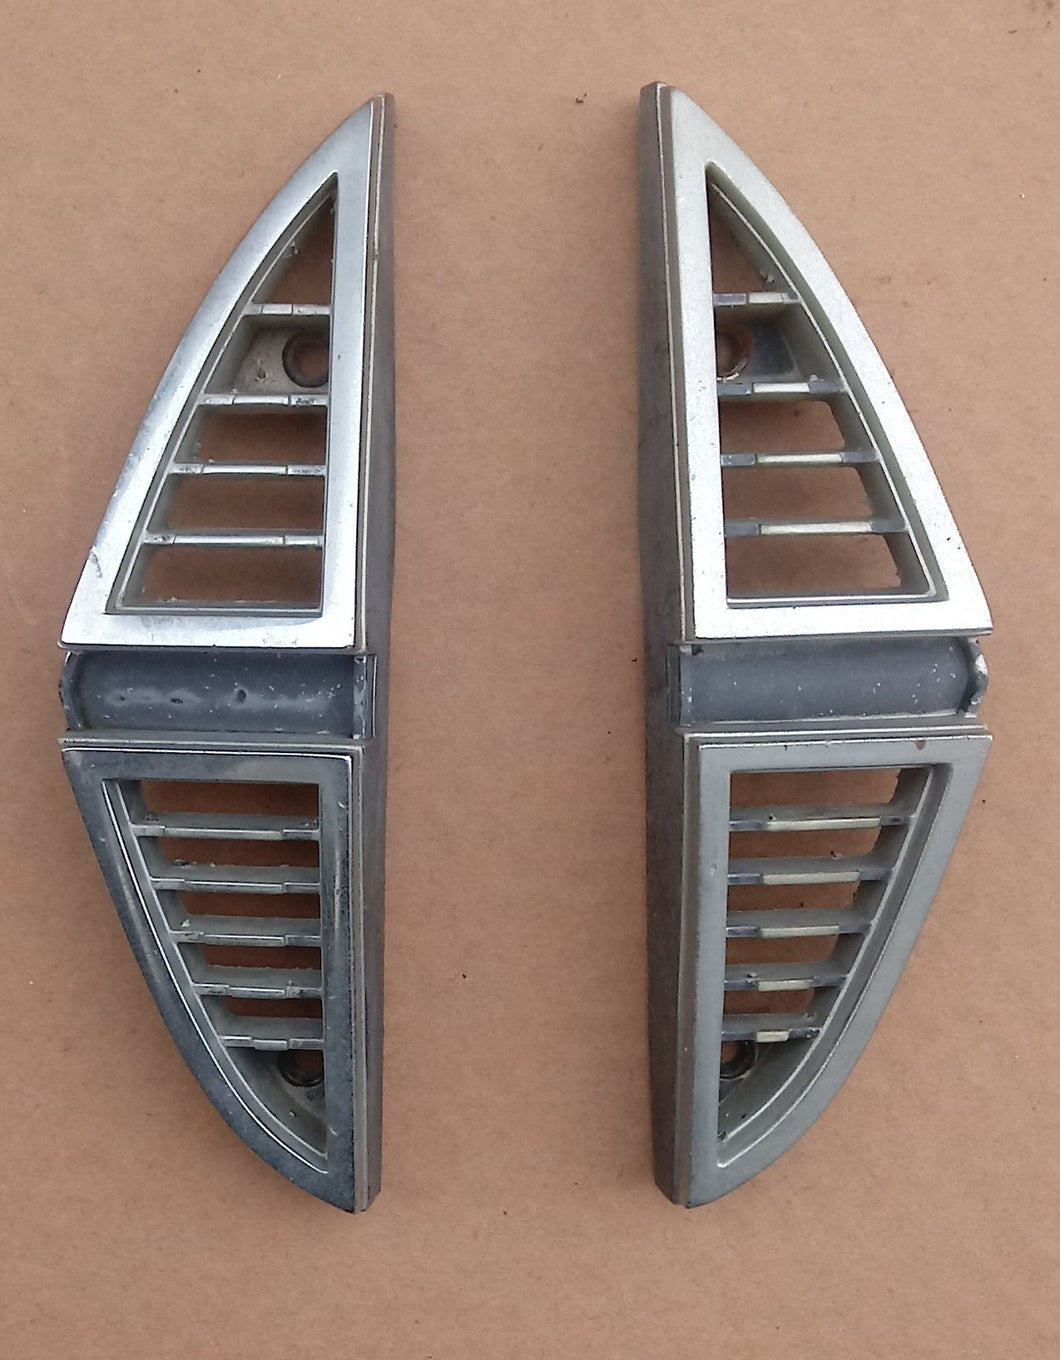 1969 Ford Thunderbird grille ends